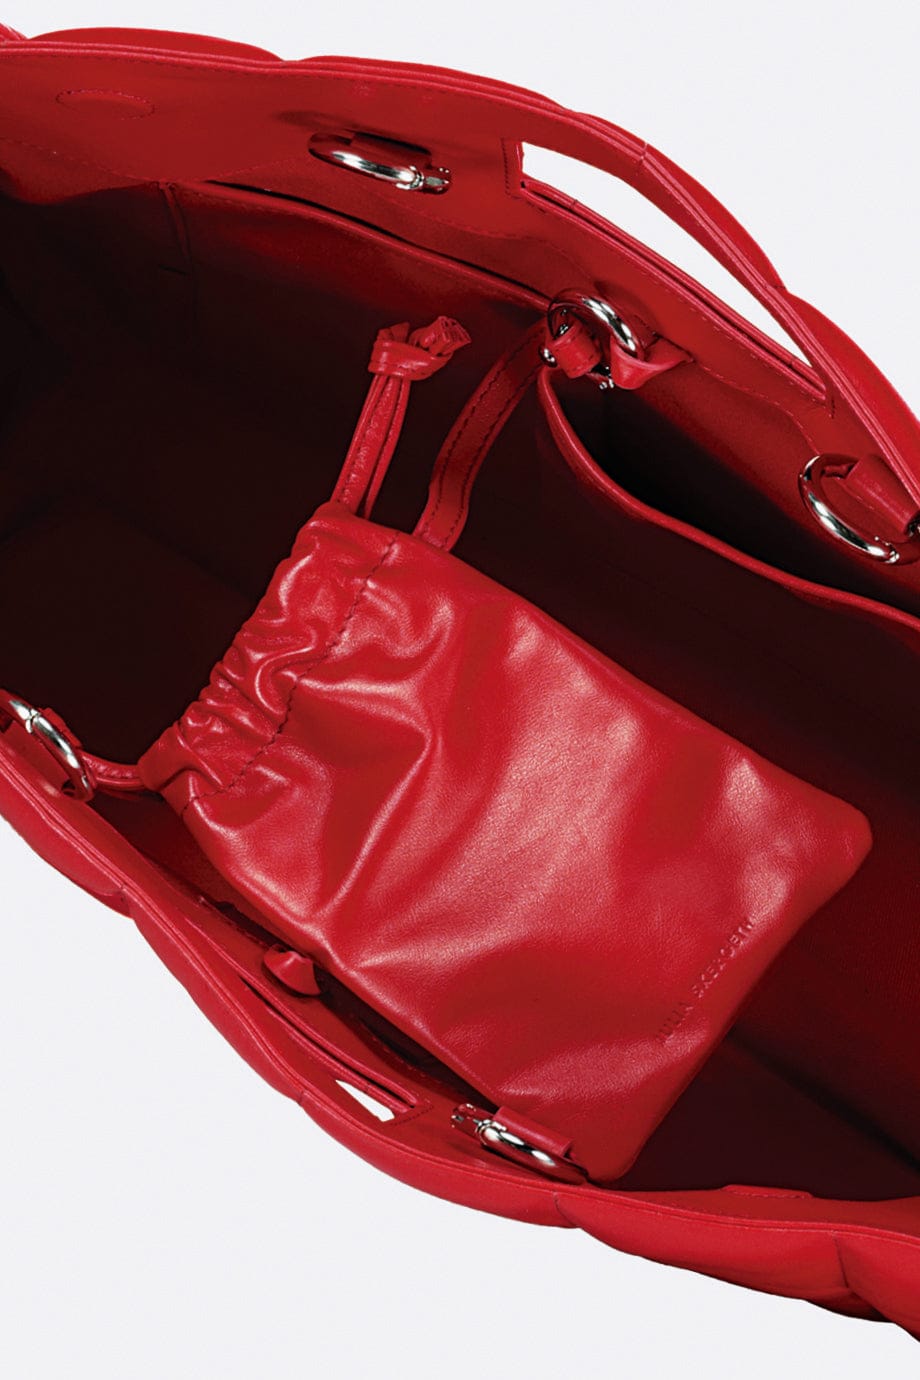 The QUILTED BAG LARGE Rosso - JULIA SKERGETH